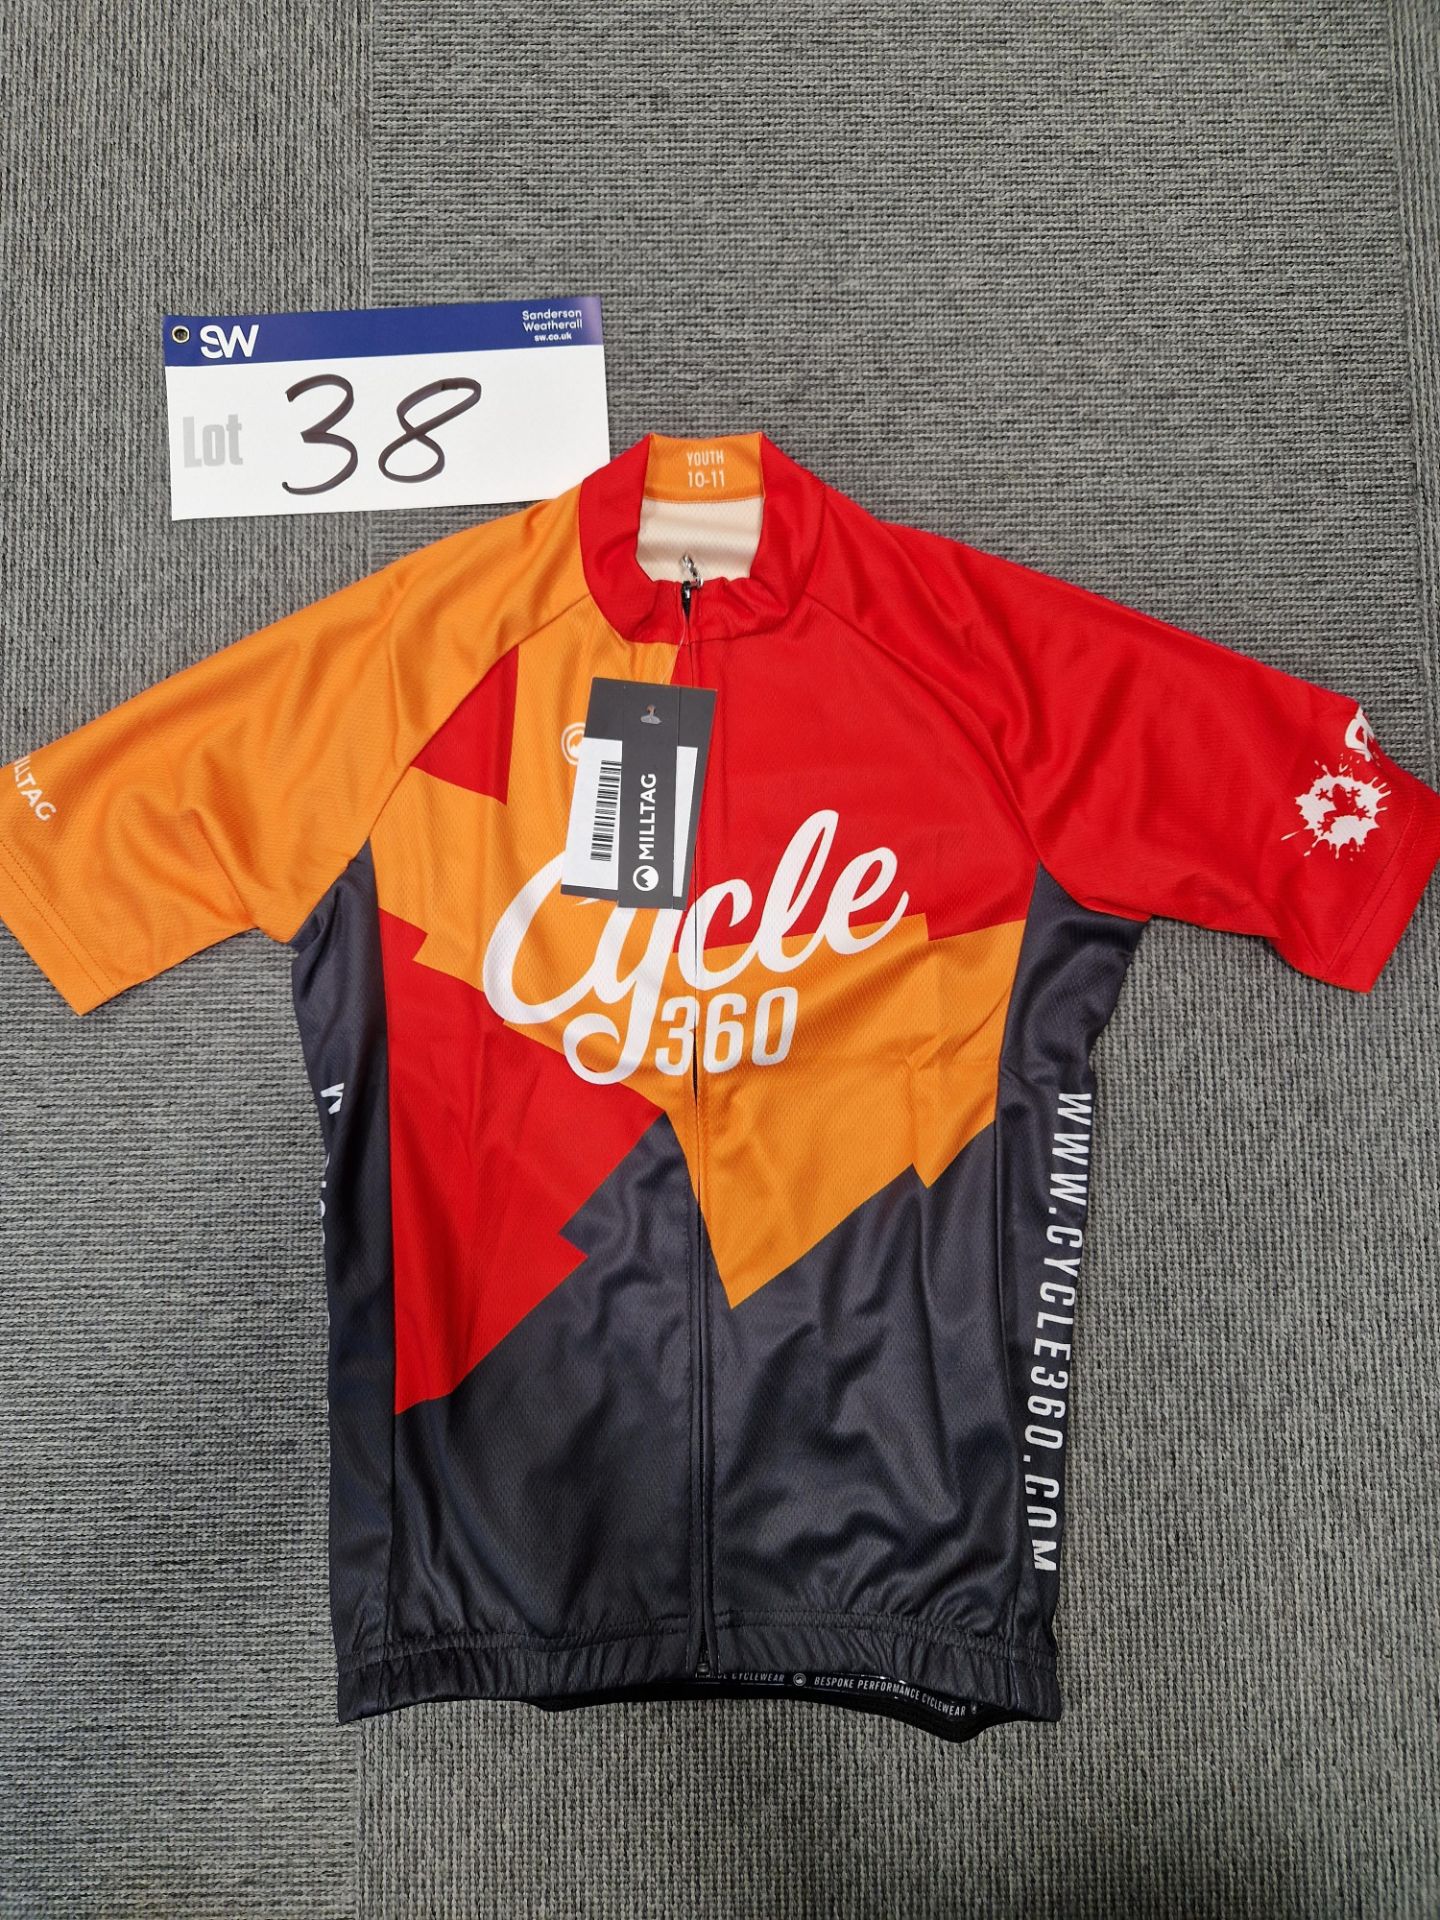 Youth's 10-11 Milltag Cycling Jersey, Branded Cycle 360, 100% PolyesterPlease read the following